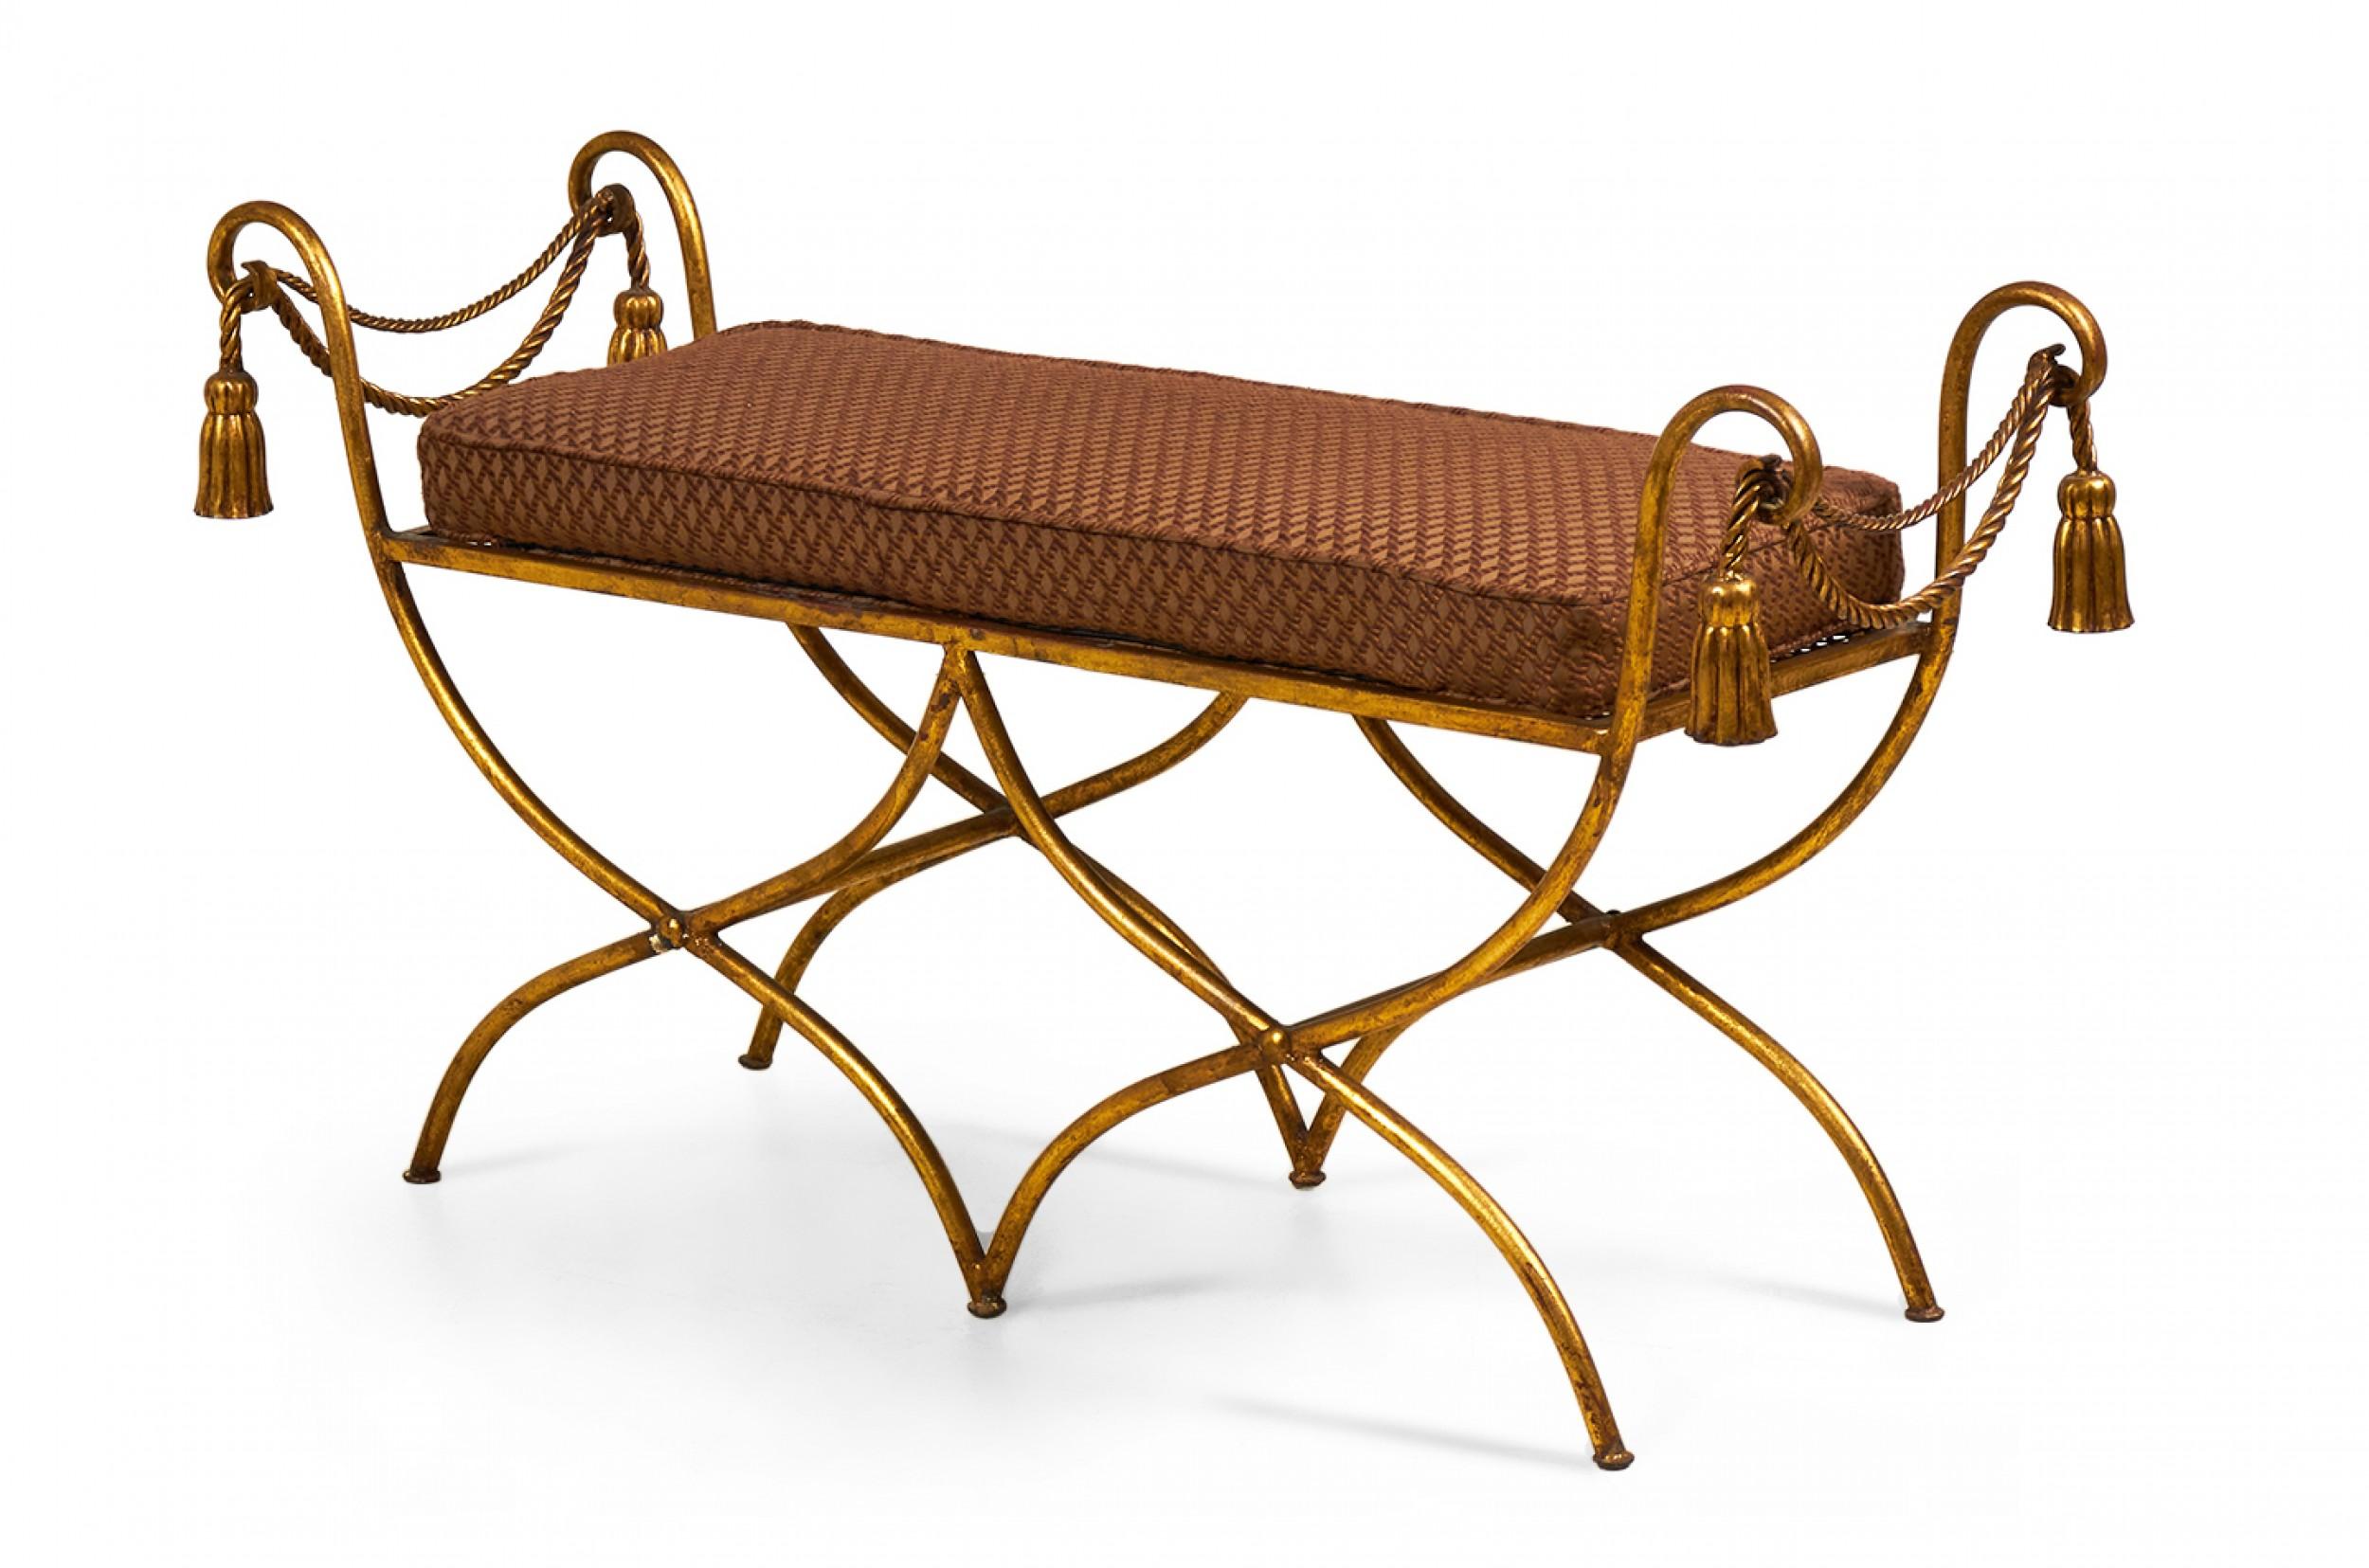 Italian Baroque-style mid-century (circa 1950) Rope and Tassel window bench with a gilt iron frame and unattached burgundy and gold patterned seat cushion. (PALLADIO, ITALY)